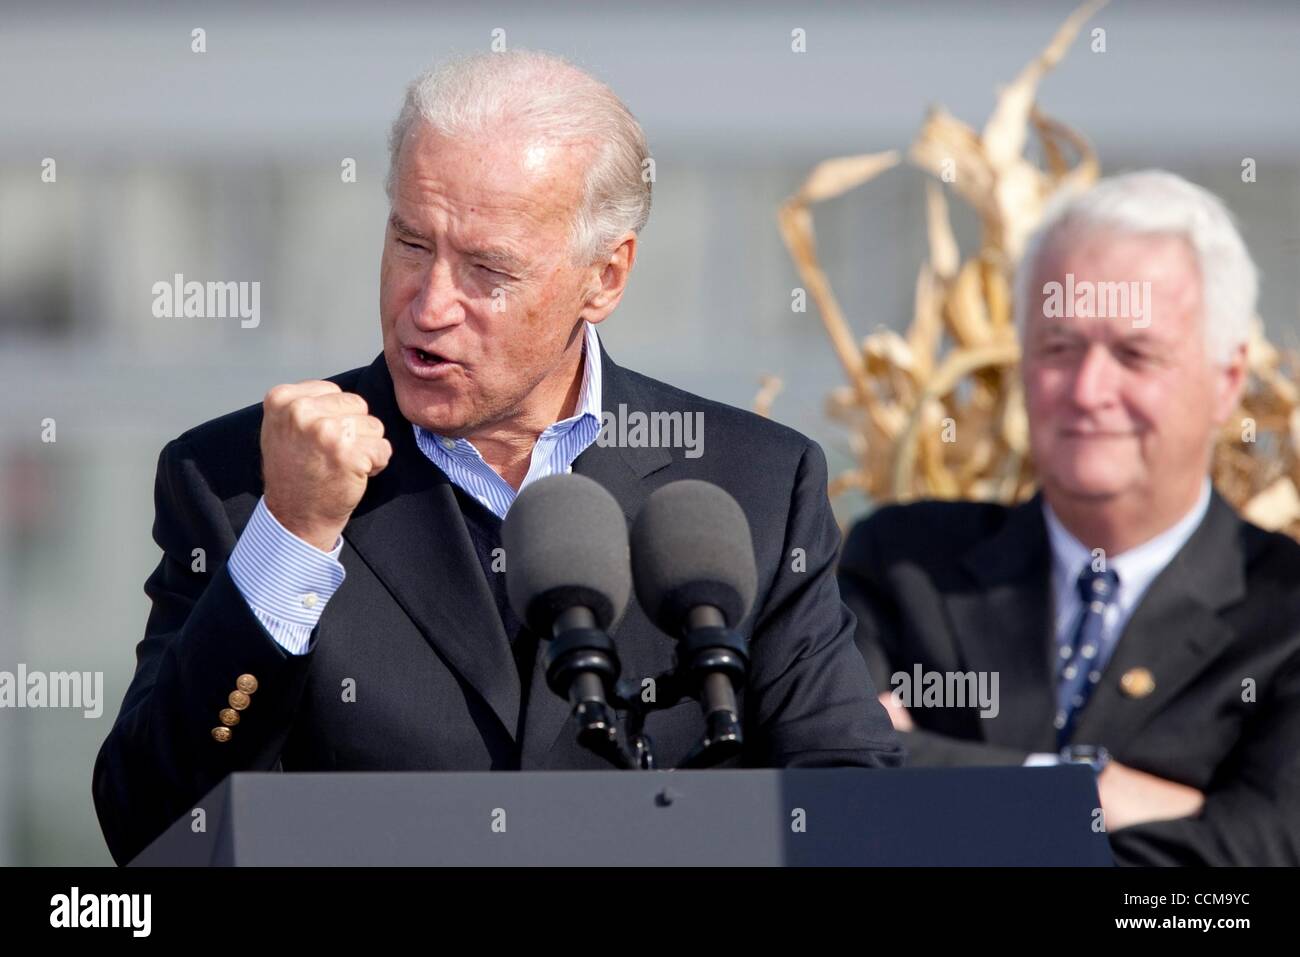 Oct 30, 2010 - Quincy, Massachusetts, U.S. - Vice President JOE BIDEN gives a stump speech for Democratic candidate for congress Bill Keating, during a campaign event at the Tirrell Room in Quincy. Keating is running to replace the seat being vacated by 10th District Rep. WILLIAM DELAHUNT, seated be Stock Photo